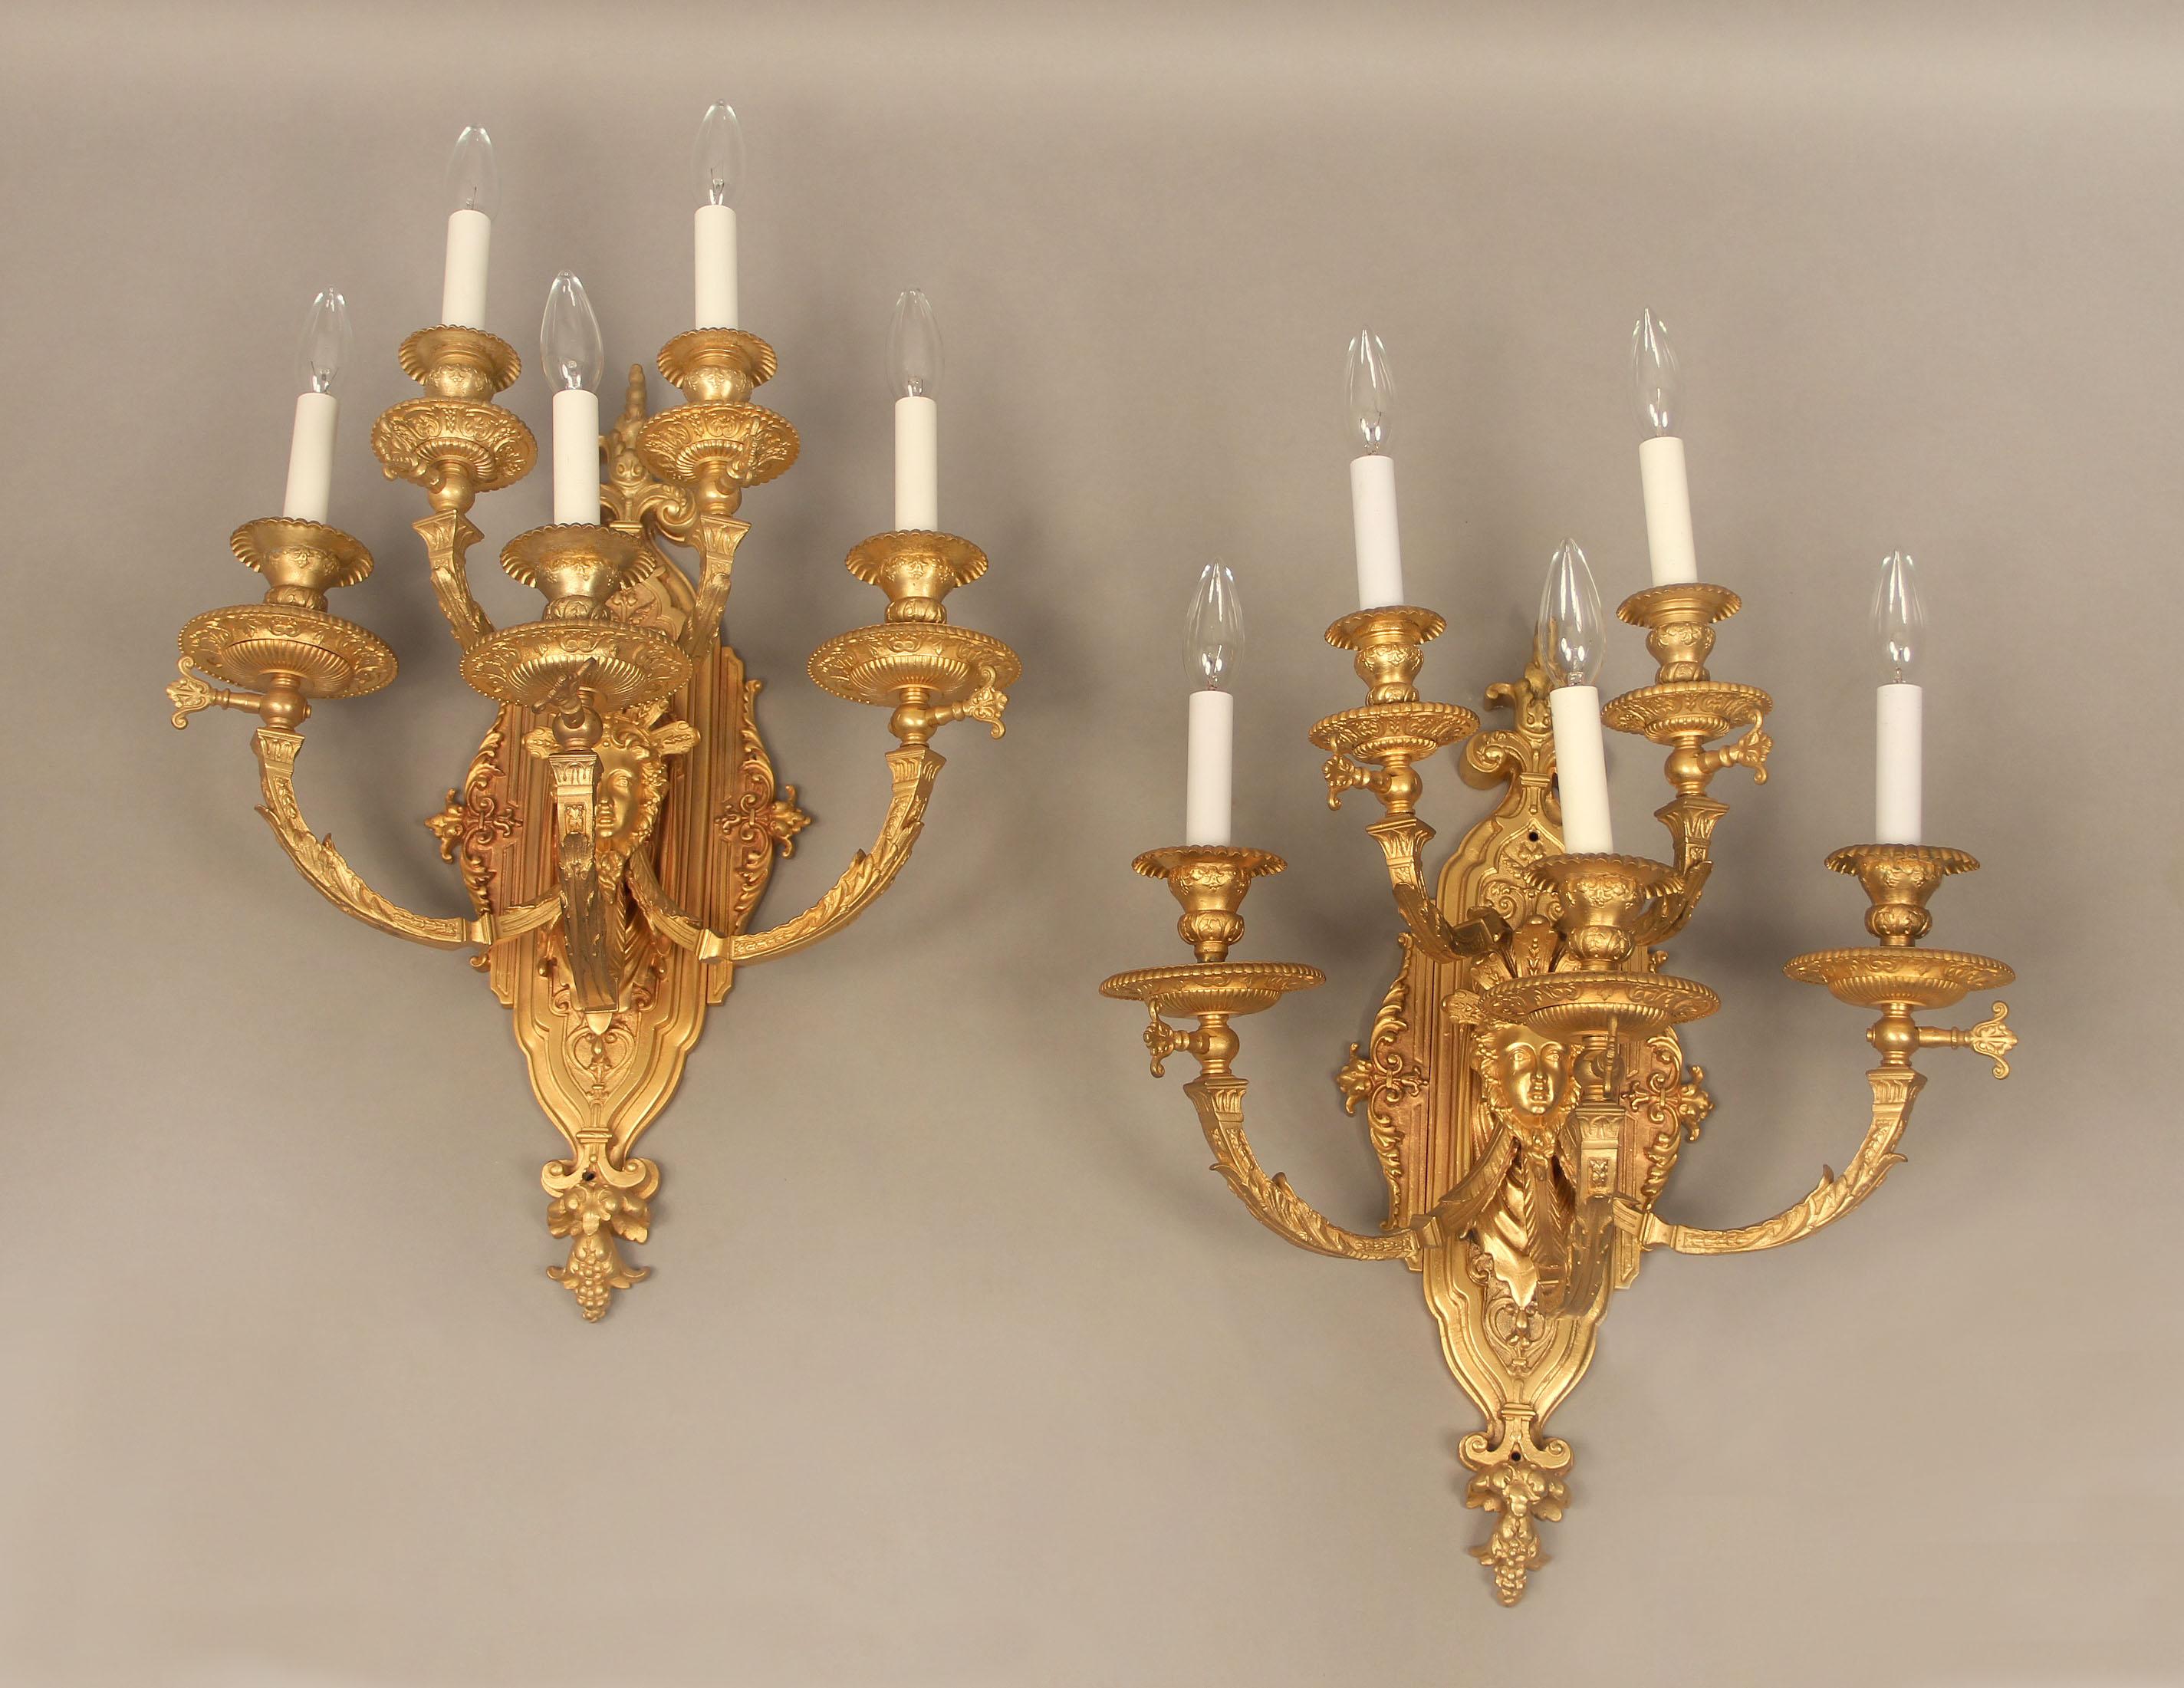 A pair of late 19th century gilt bronze five light sconces

with foliate-scrolled arms and backplate, centered by a female mask and five tiered lights.